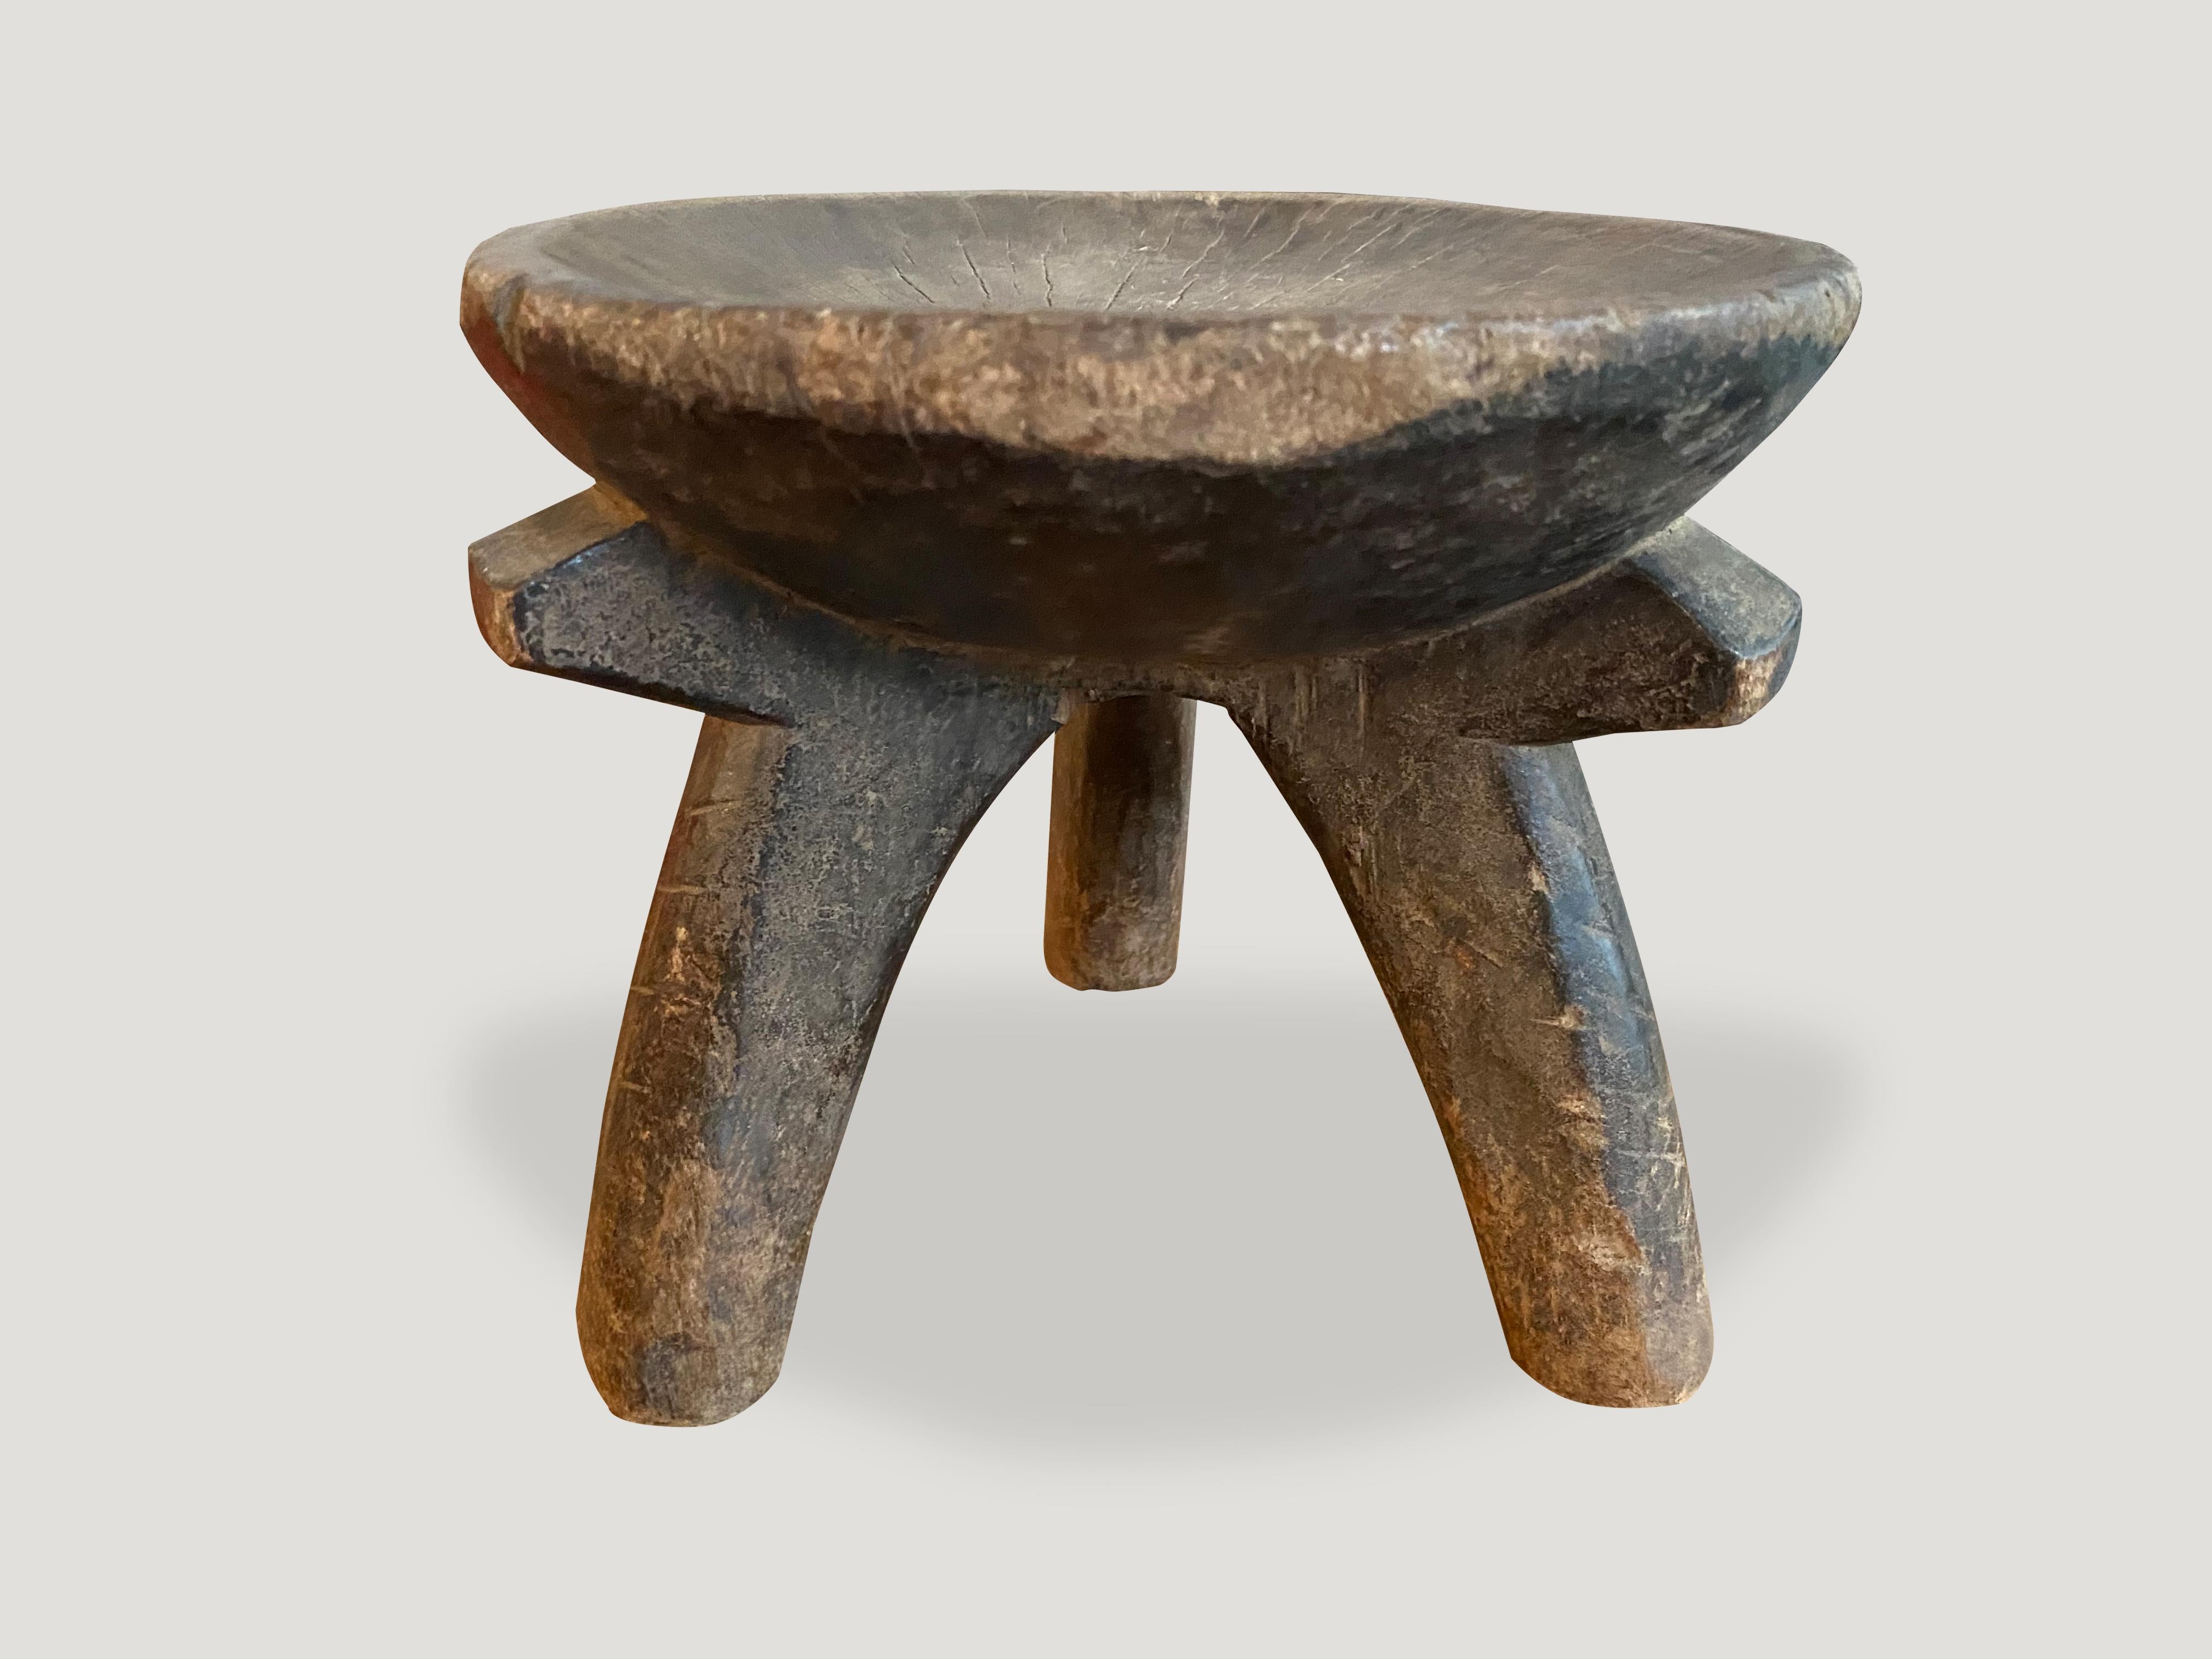 Mid-20th Century Andrianna Shamaris Mahogany Wood Antique African Side Table, Stool or Bowl